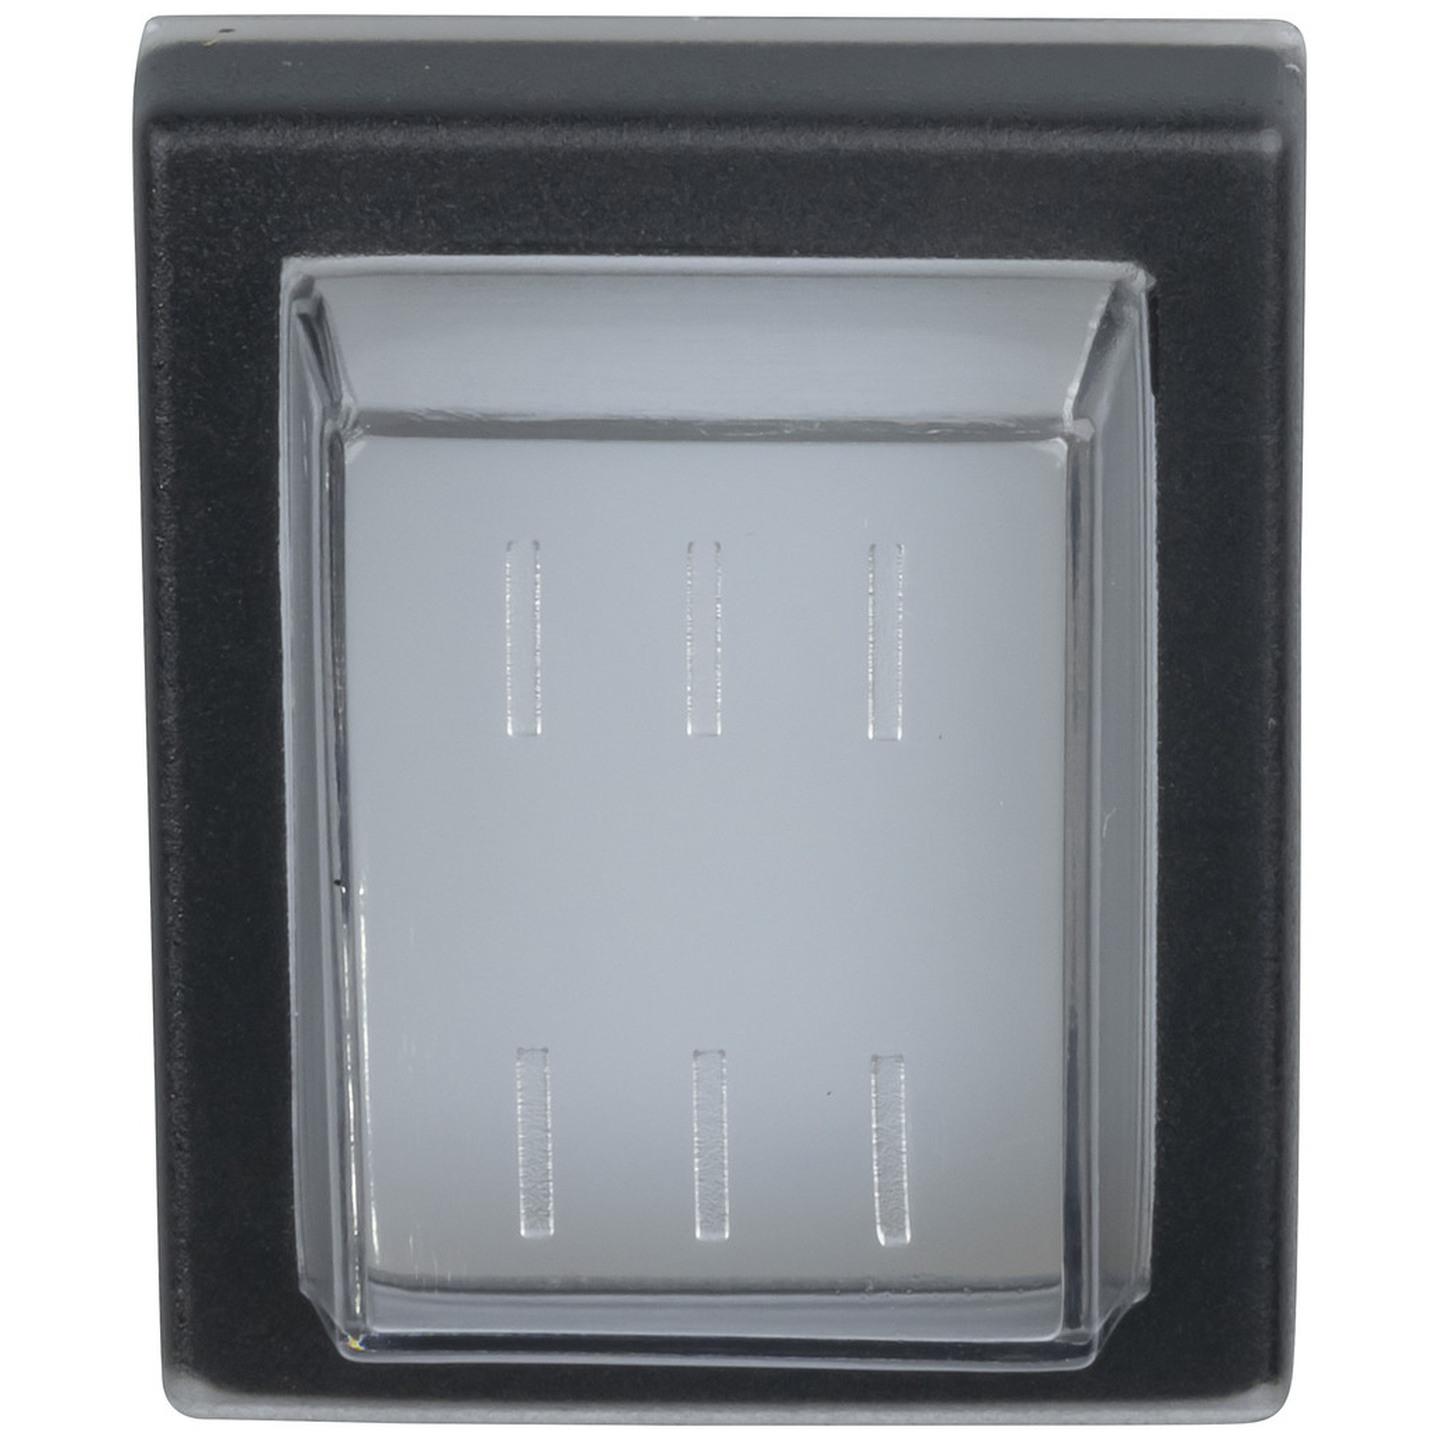 Waterproof Cap For Large Rocker Switches